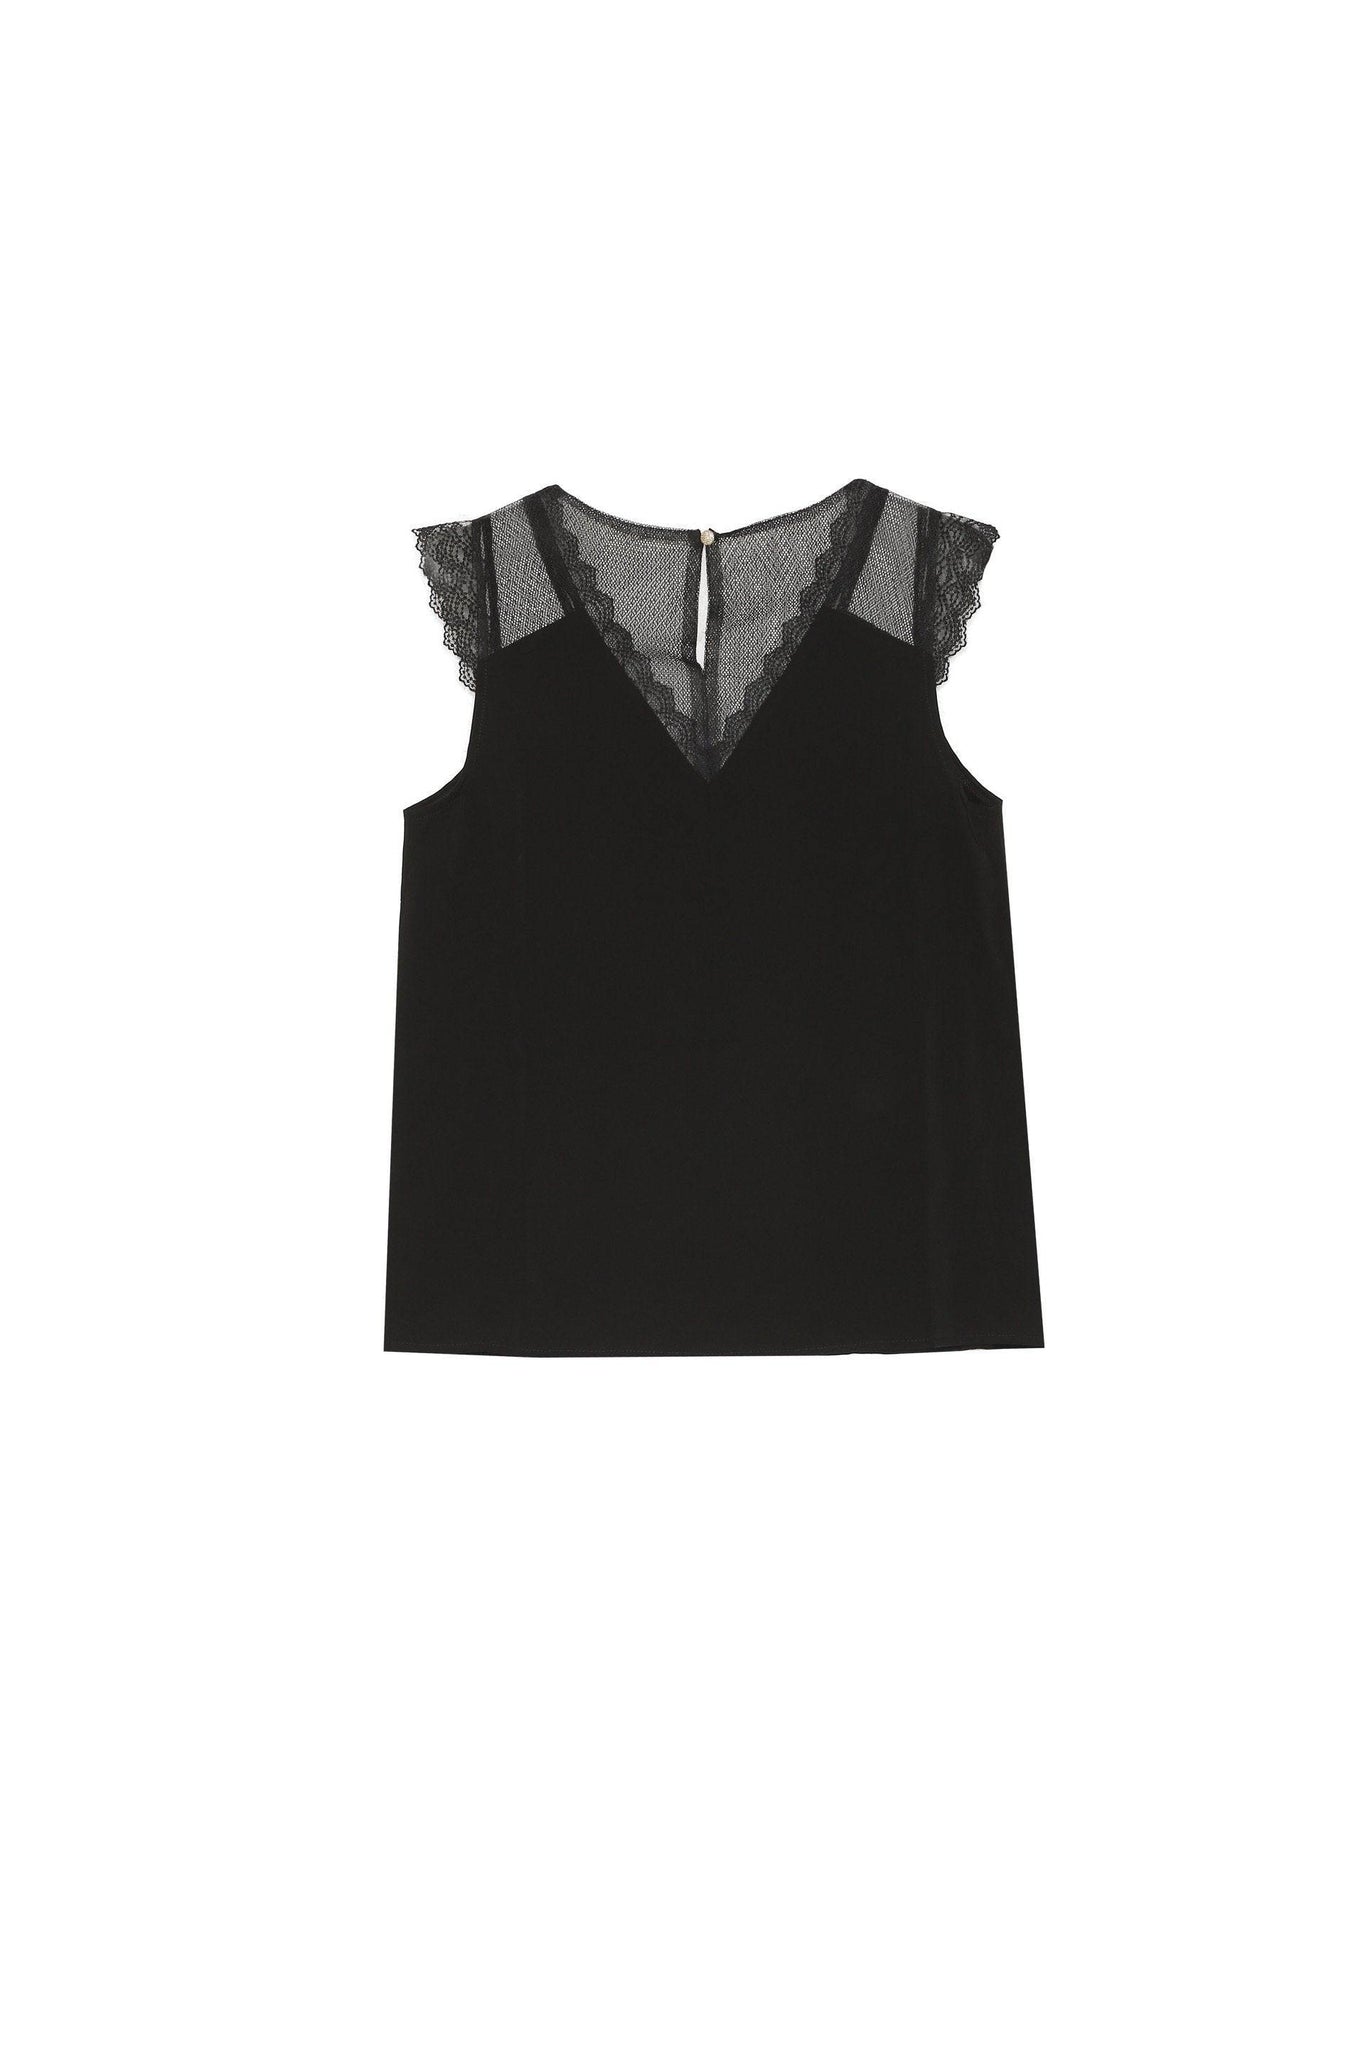 Grace & Mila Black Short-Sleeve Woven Top - Your Style Your Story